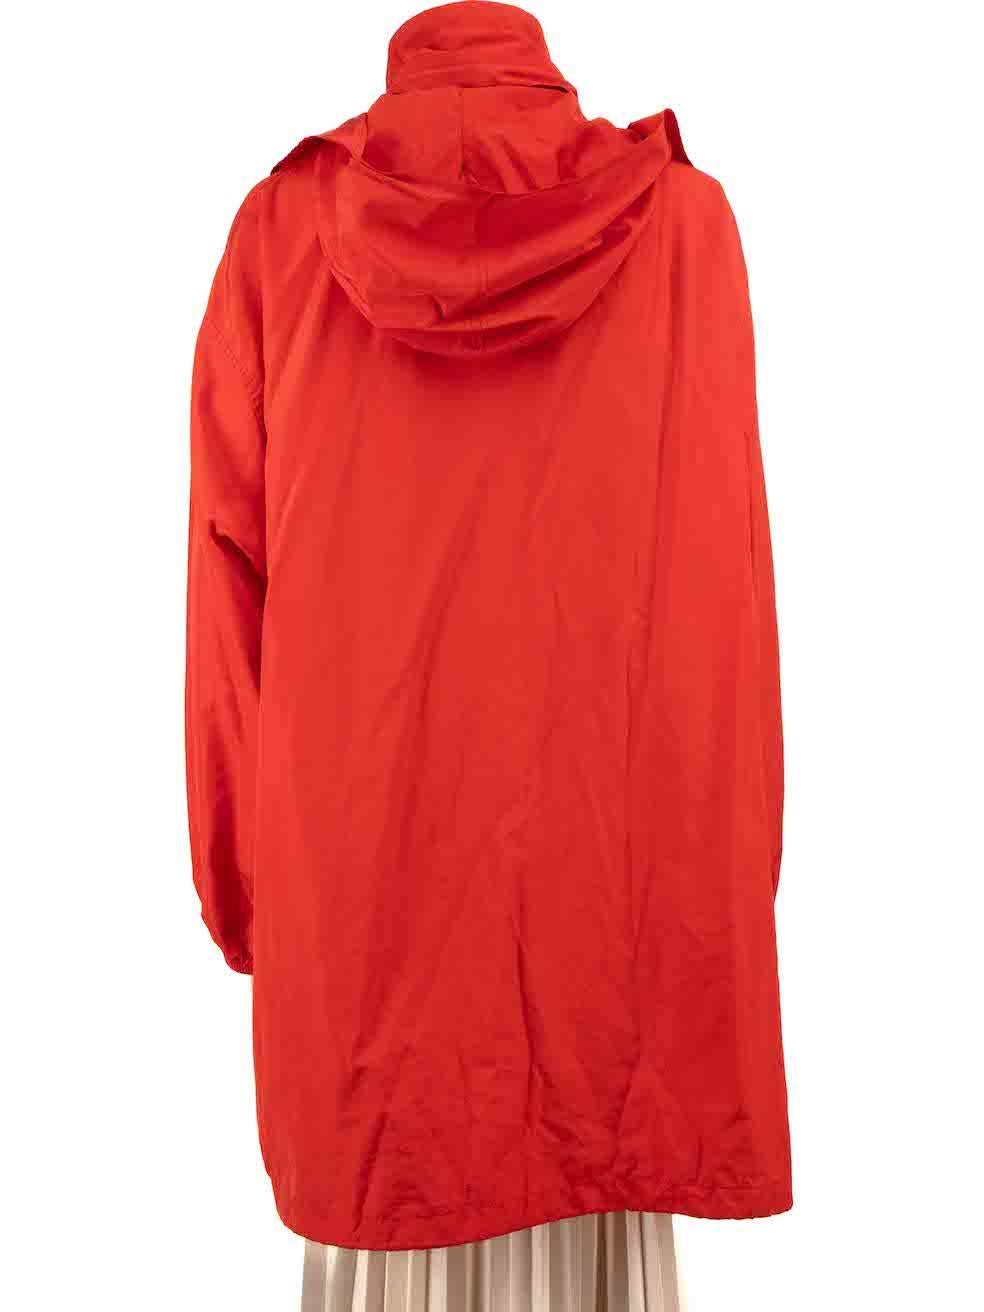 Balenciaga Red Oversized Hooded Jacket Size L In Good Condition For Sale In London, GB